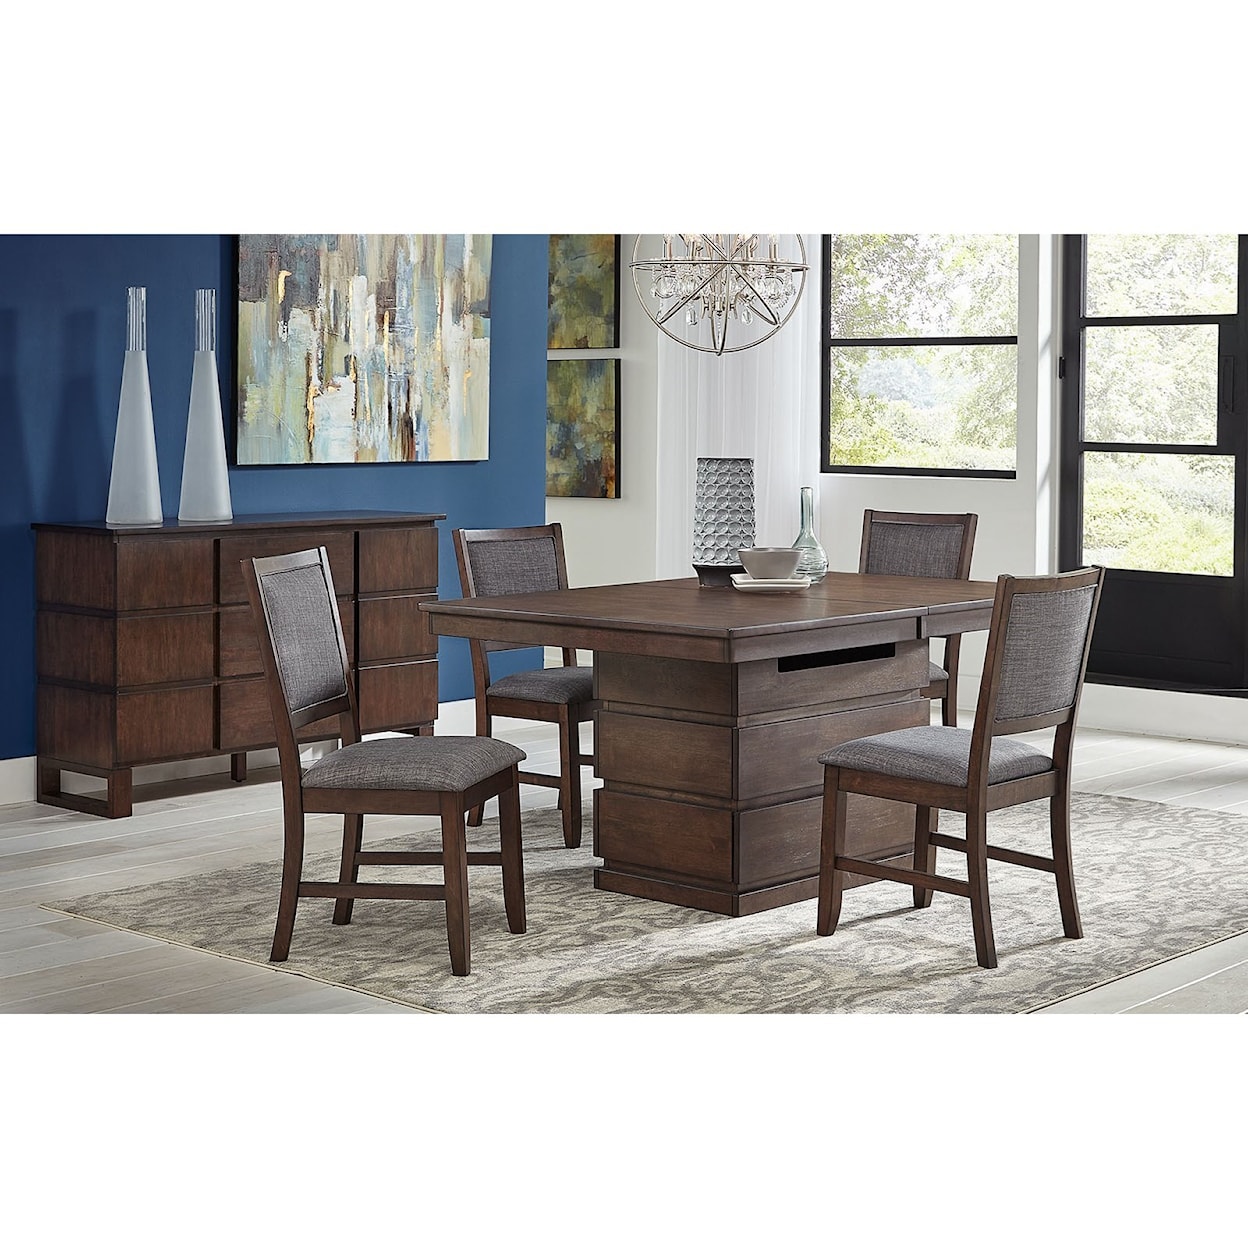 AAmerica Chesney Convertible Height Storage Table